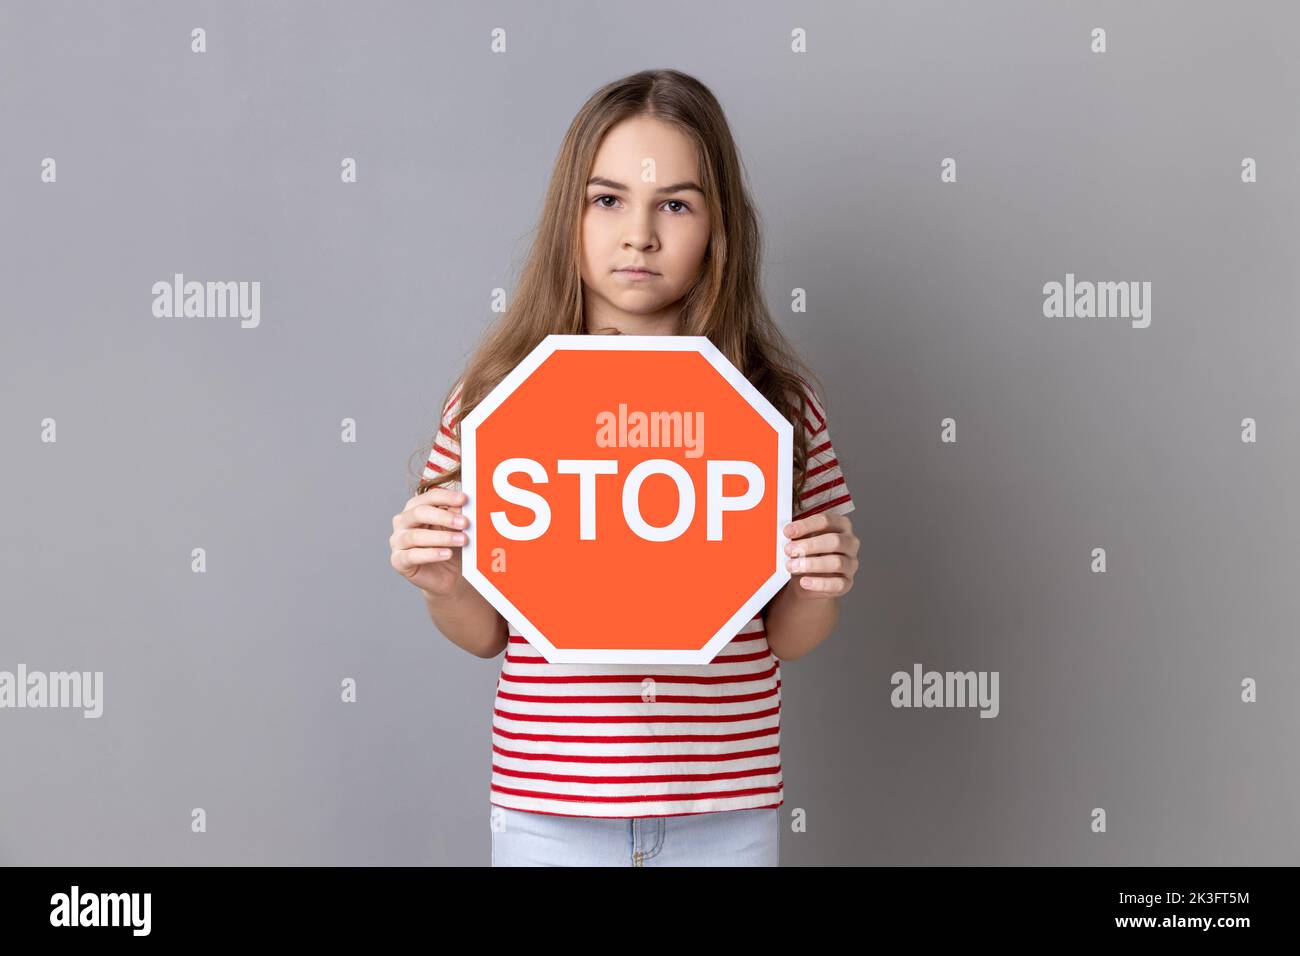 Portrait of serious strict little girl wearing striped T-shirt holding red stop sign, looking at camera with serious facial expression, prohibition. Indoor studio shot isolated on gray background. Stock Photo